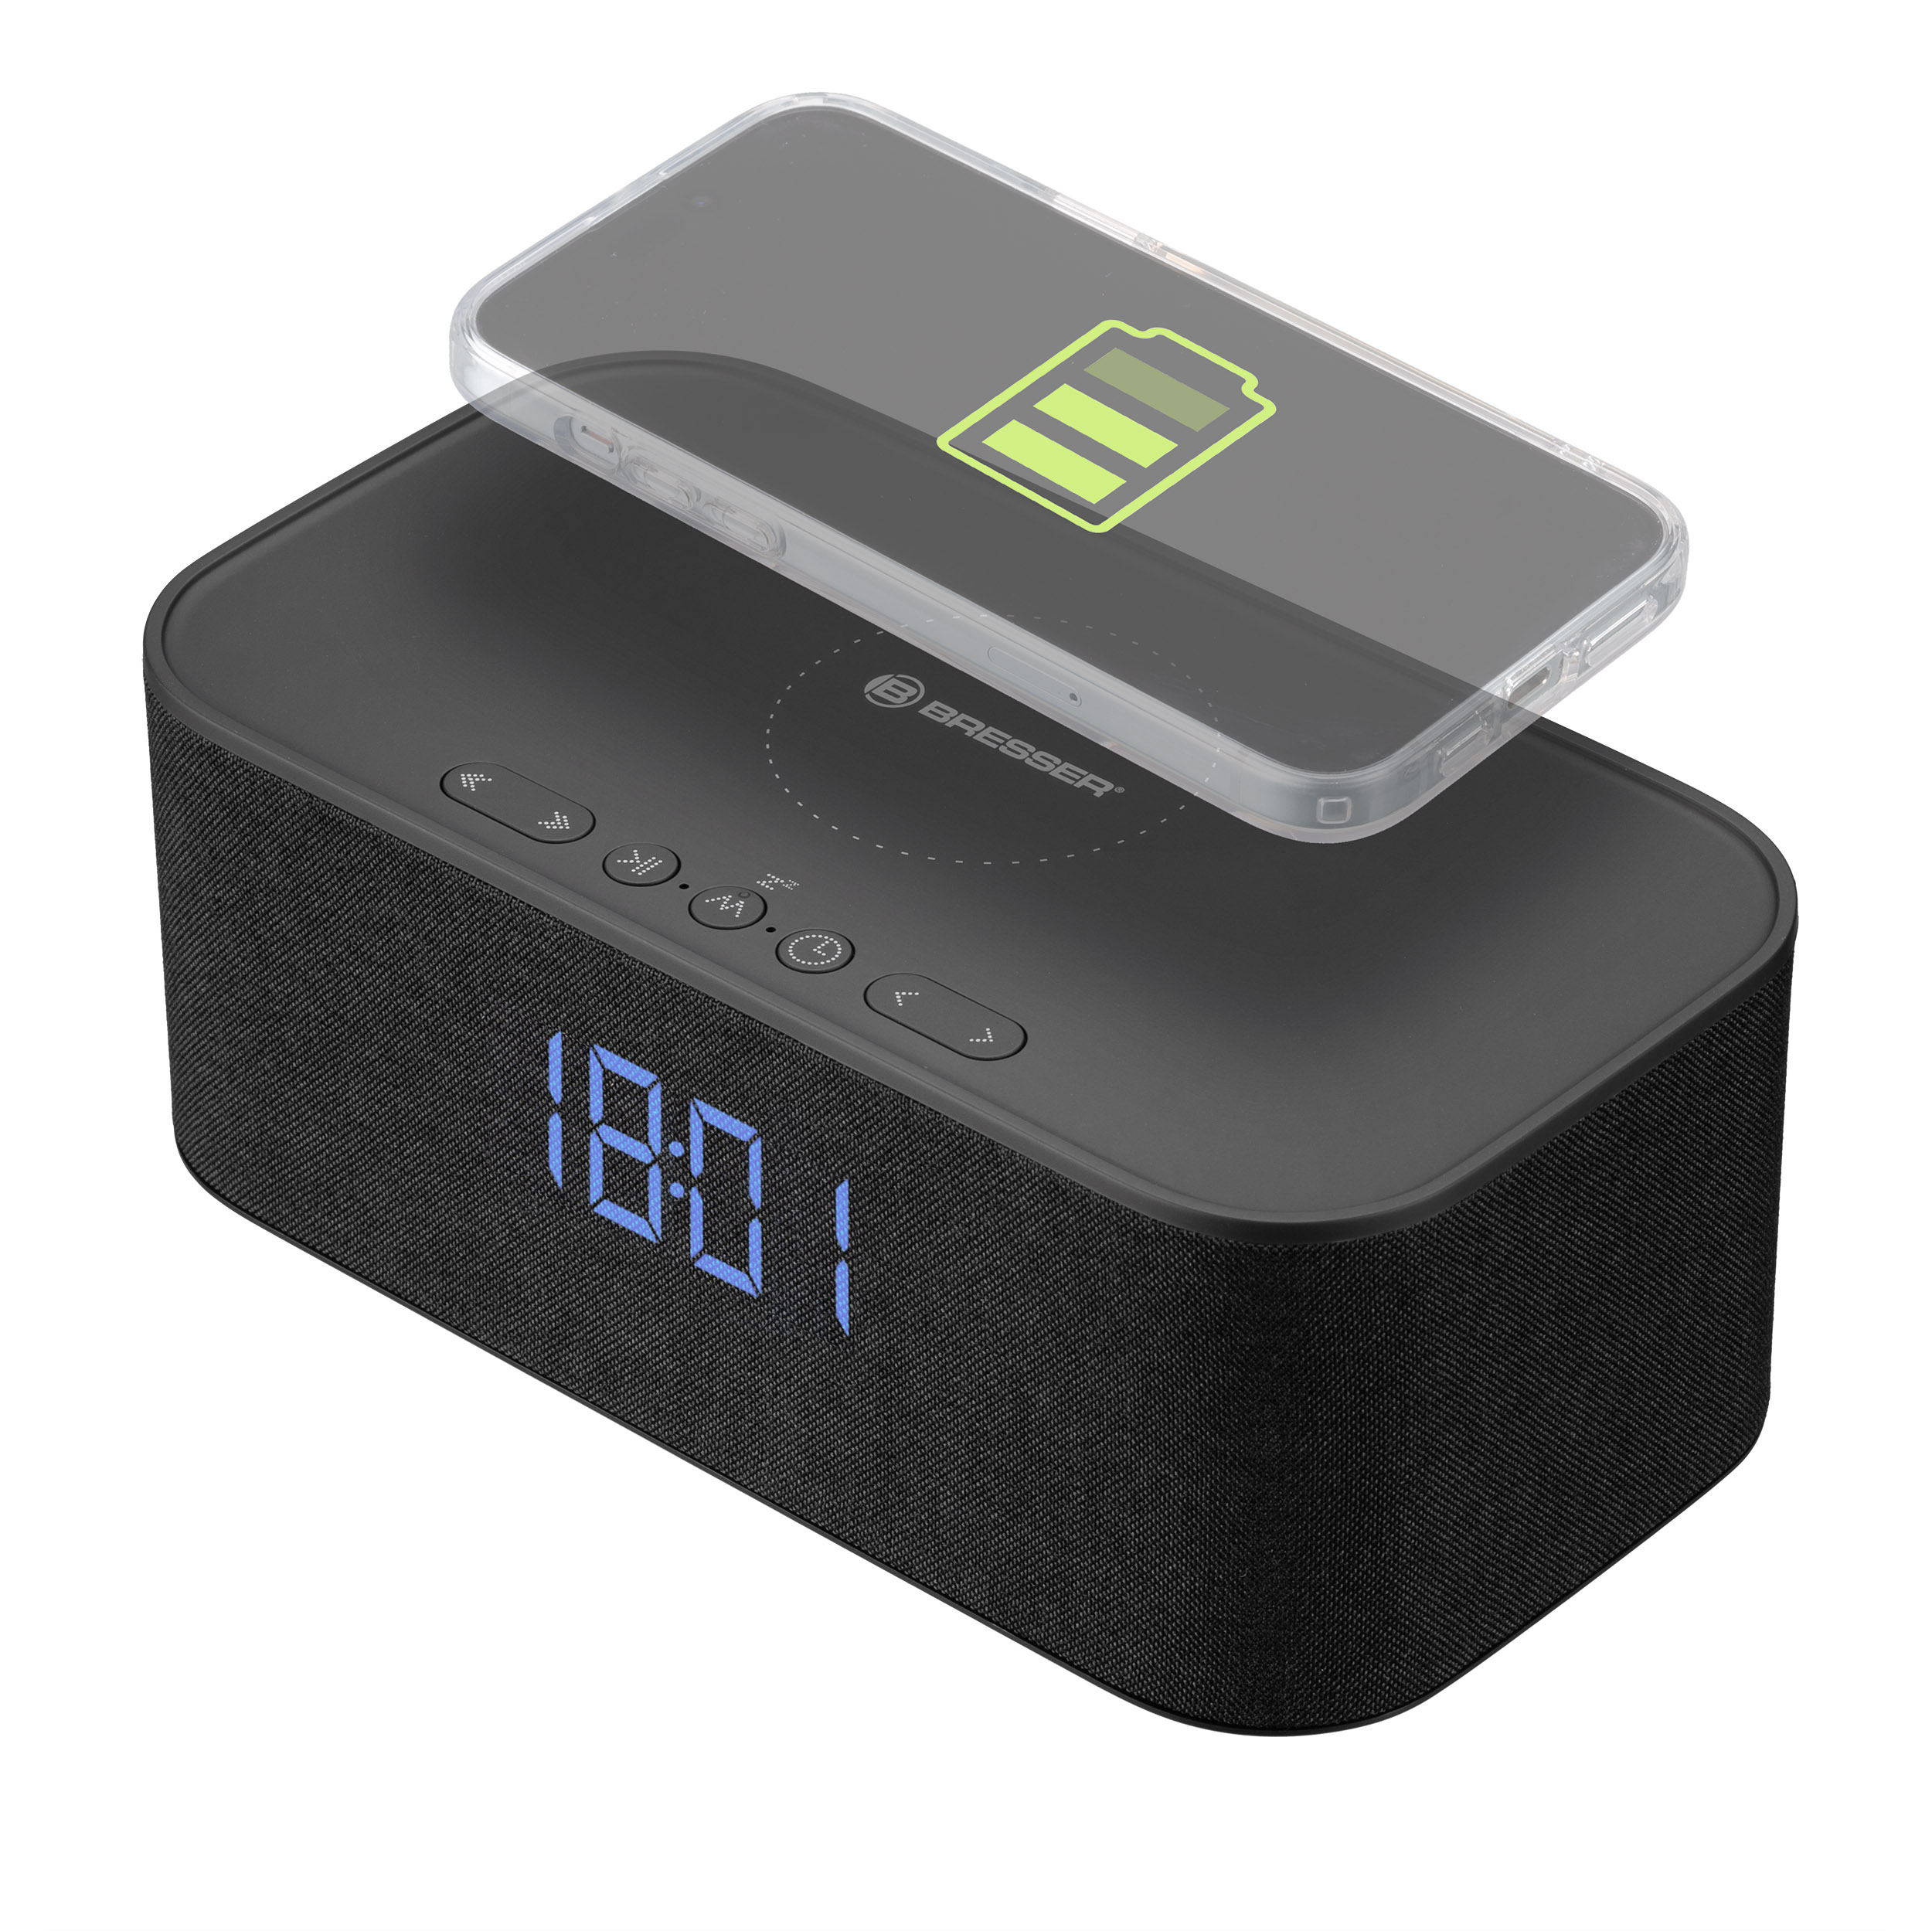 BRESSER Bluetooth speaker with alarm clock and wireless charging function (Refurbished)